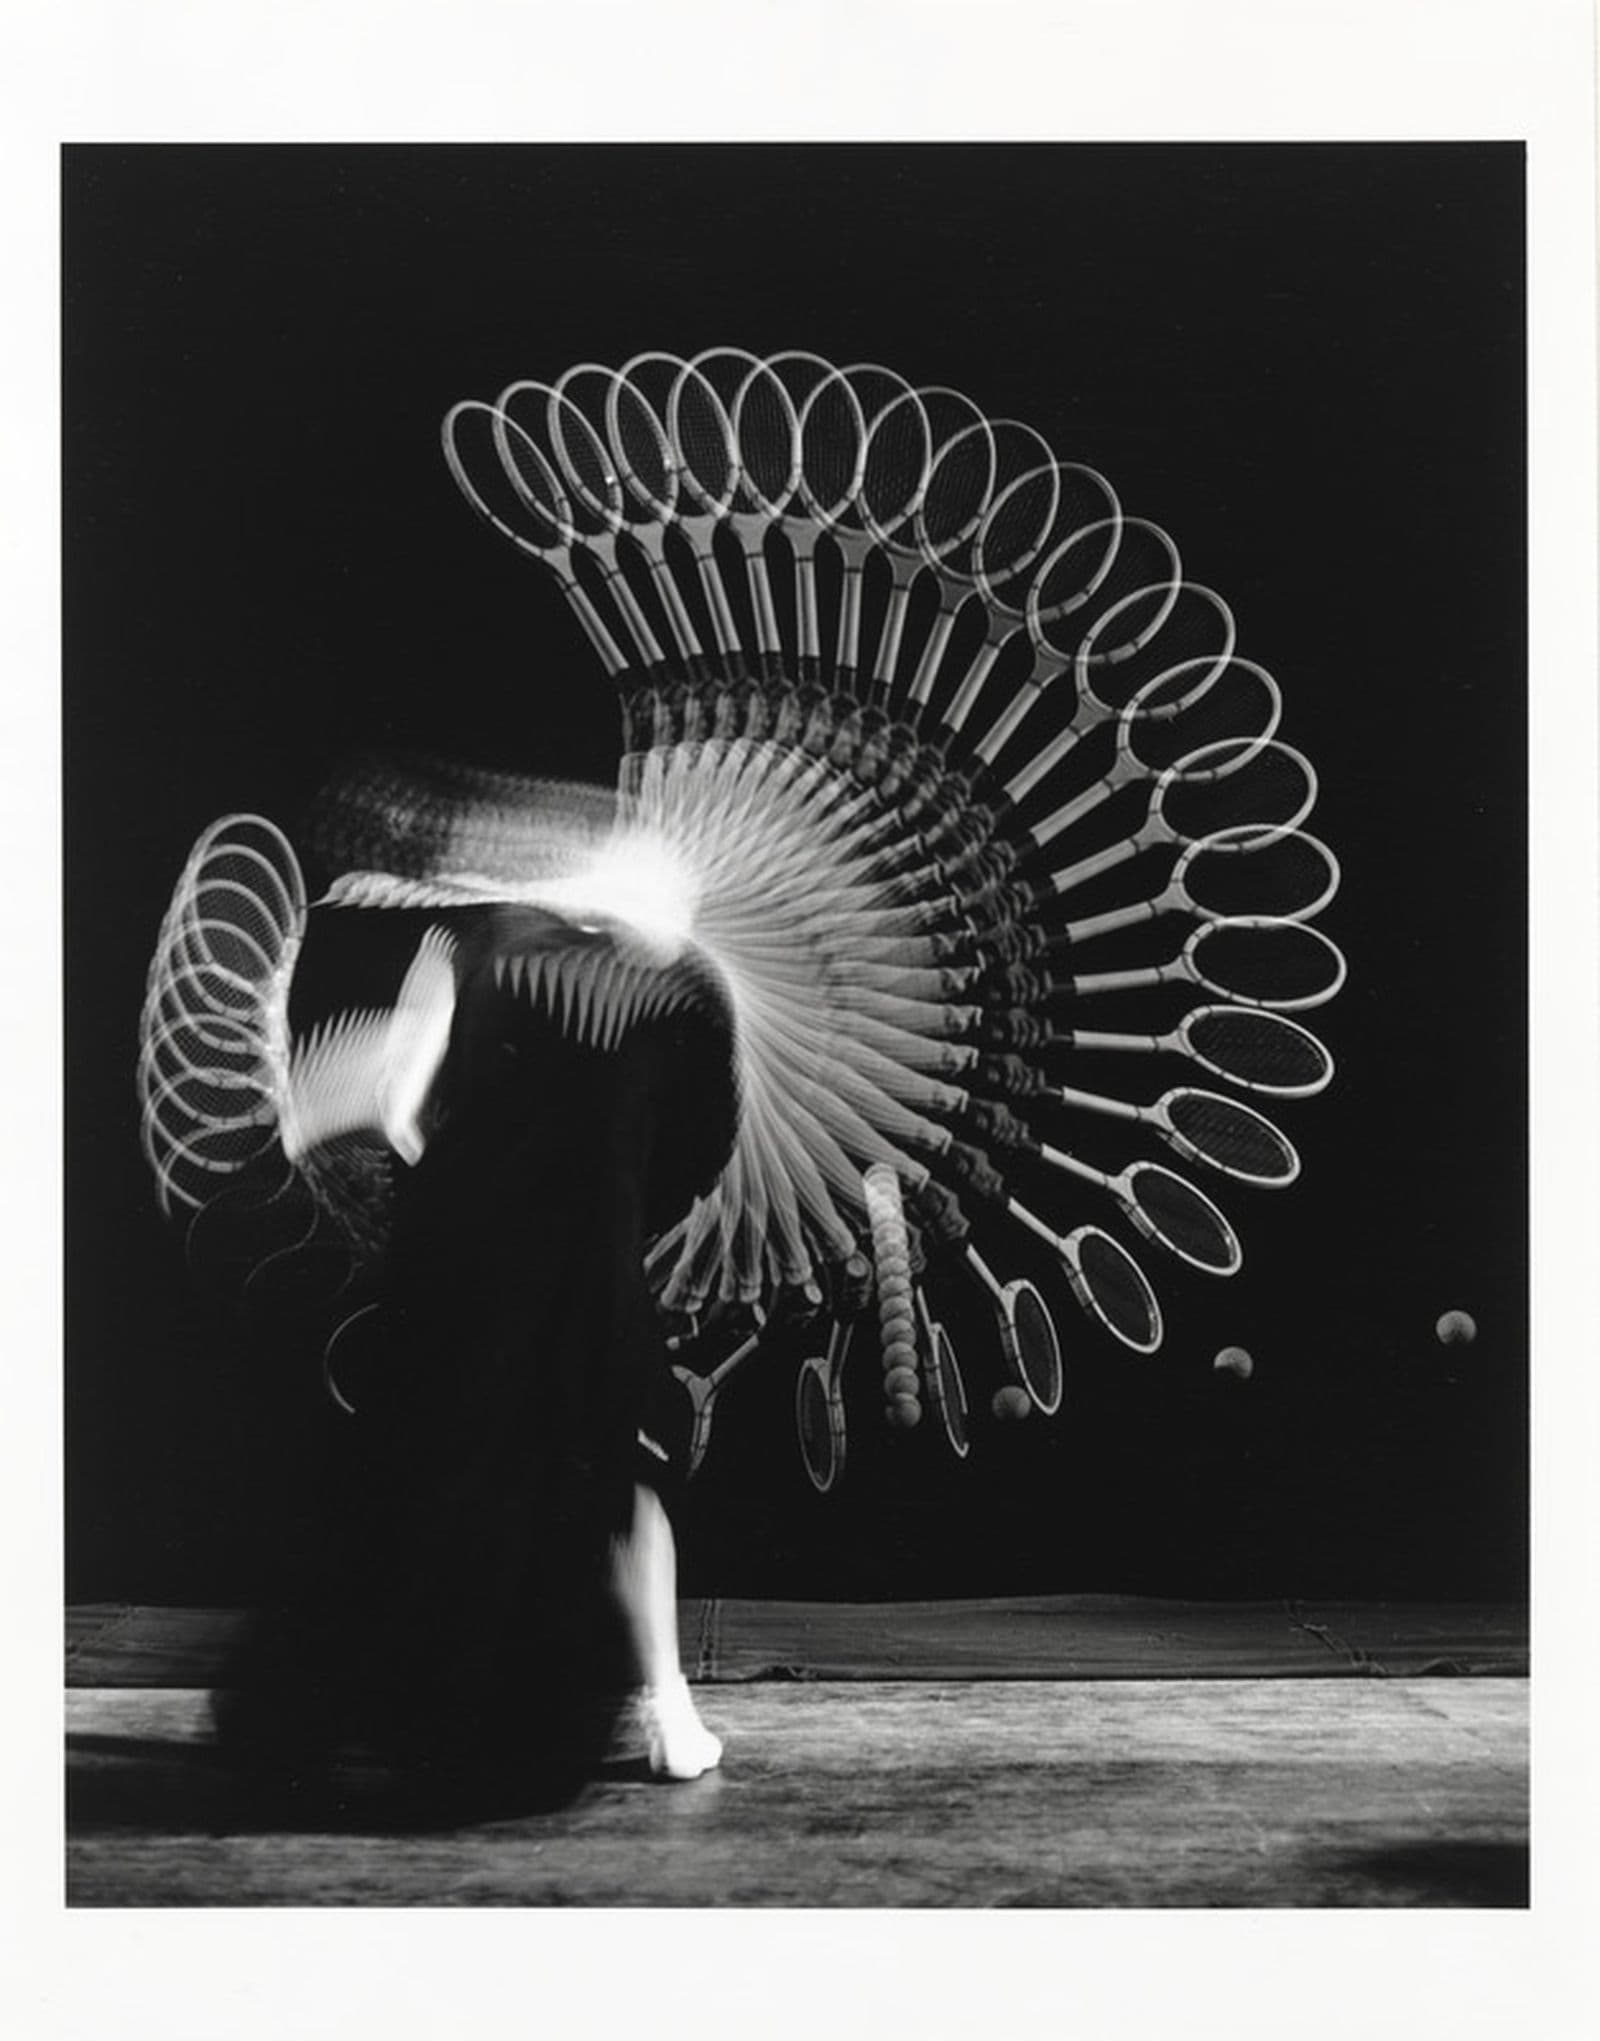 Black and white multi-exposure photograph of a figure with a racket hitting a ball.